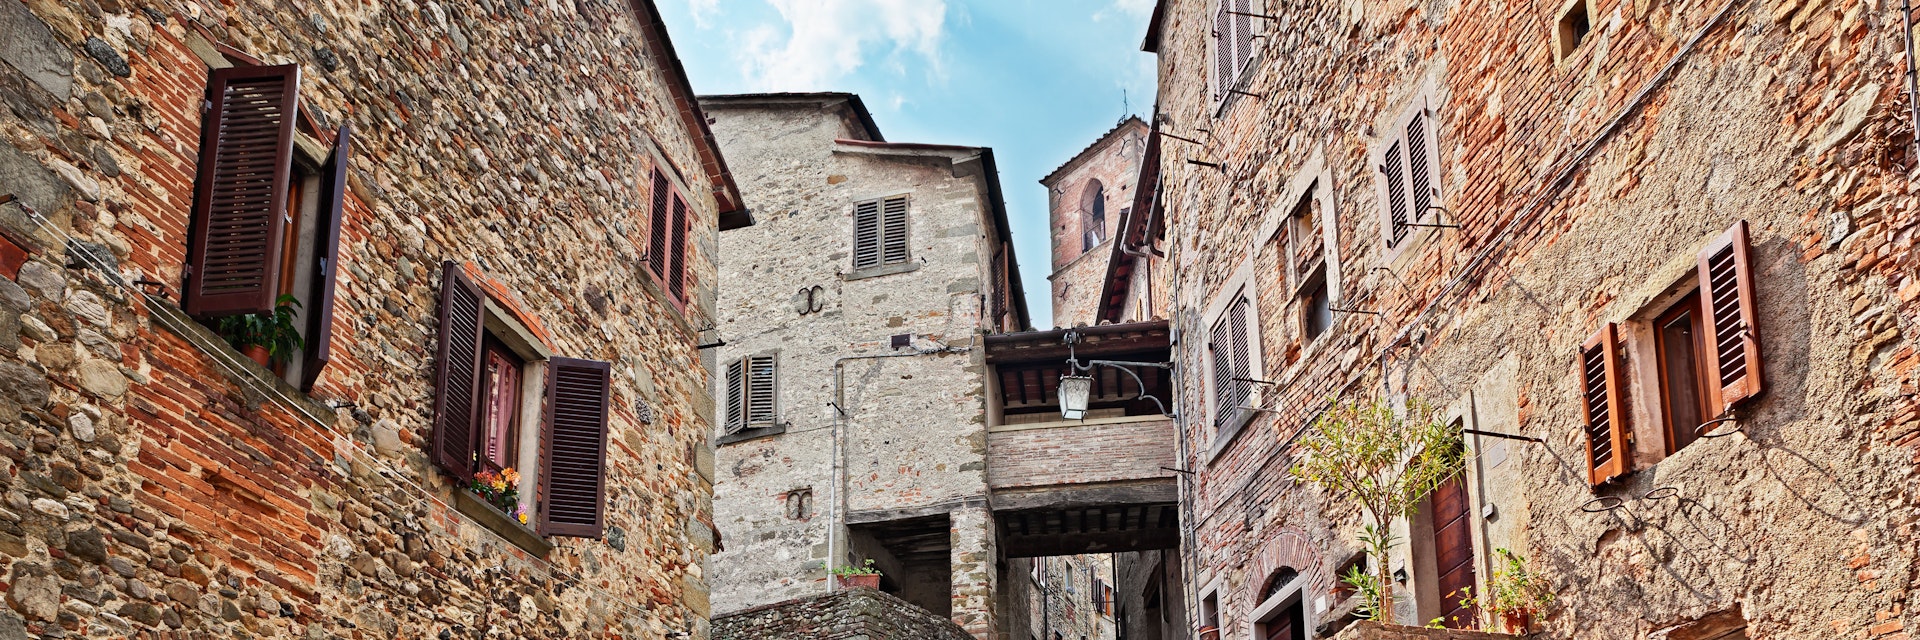 Anghiari, Arezzo, Tuscany, Italy: picturesque old narrow alley with staircase in the medieval village